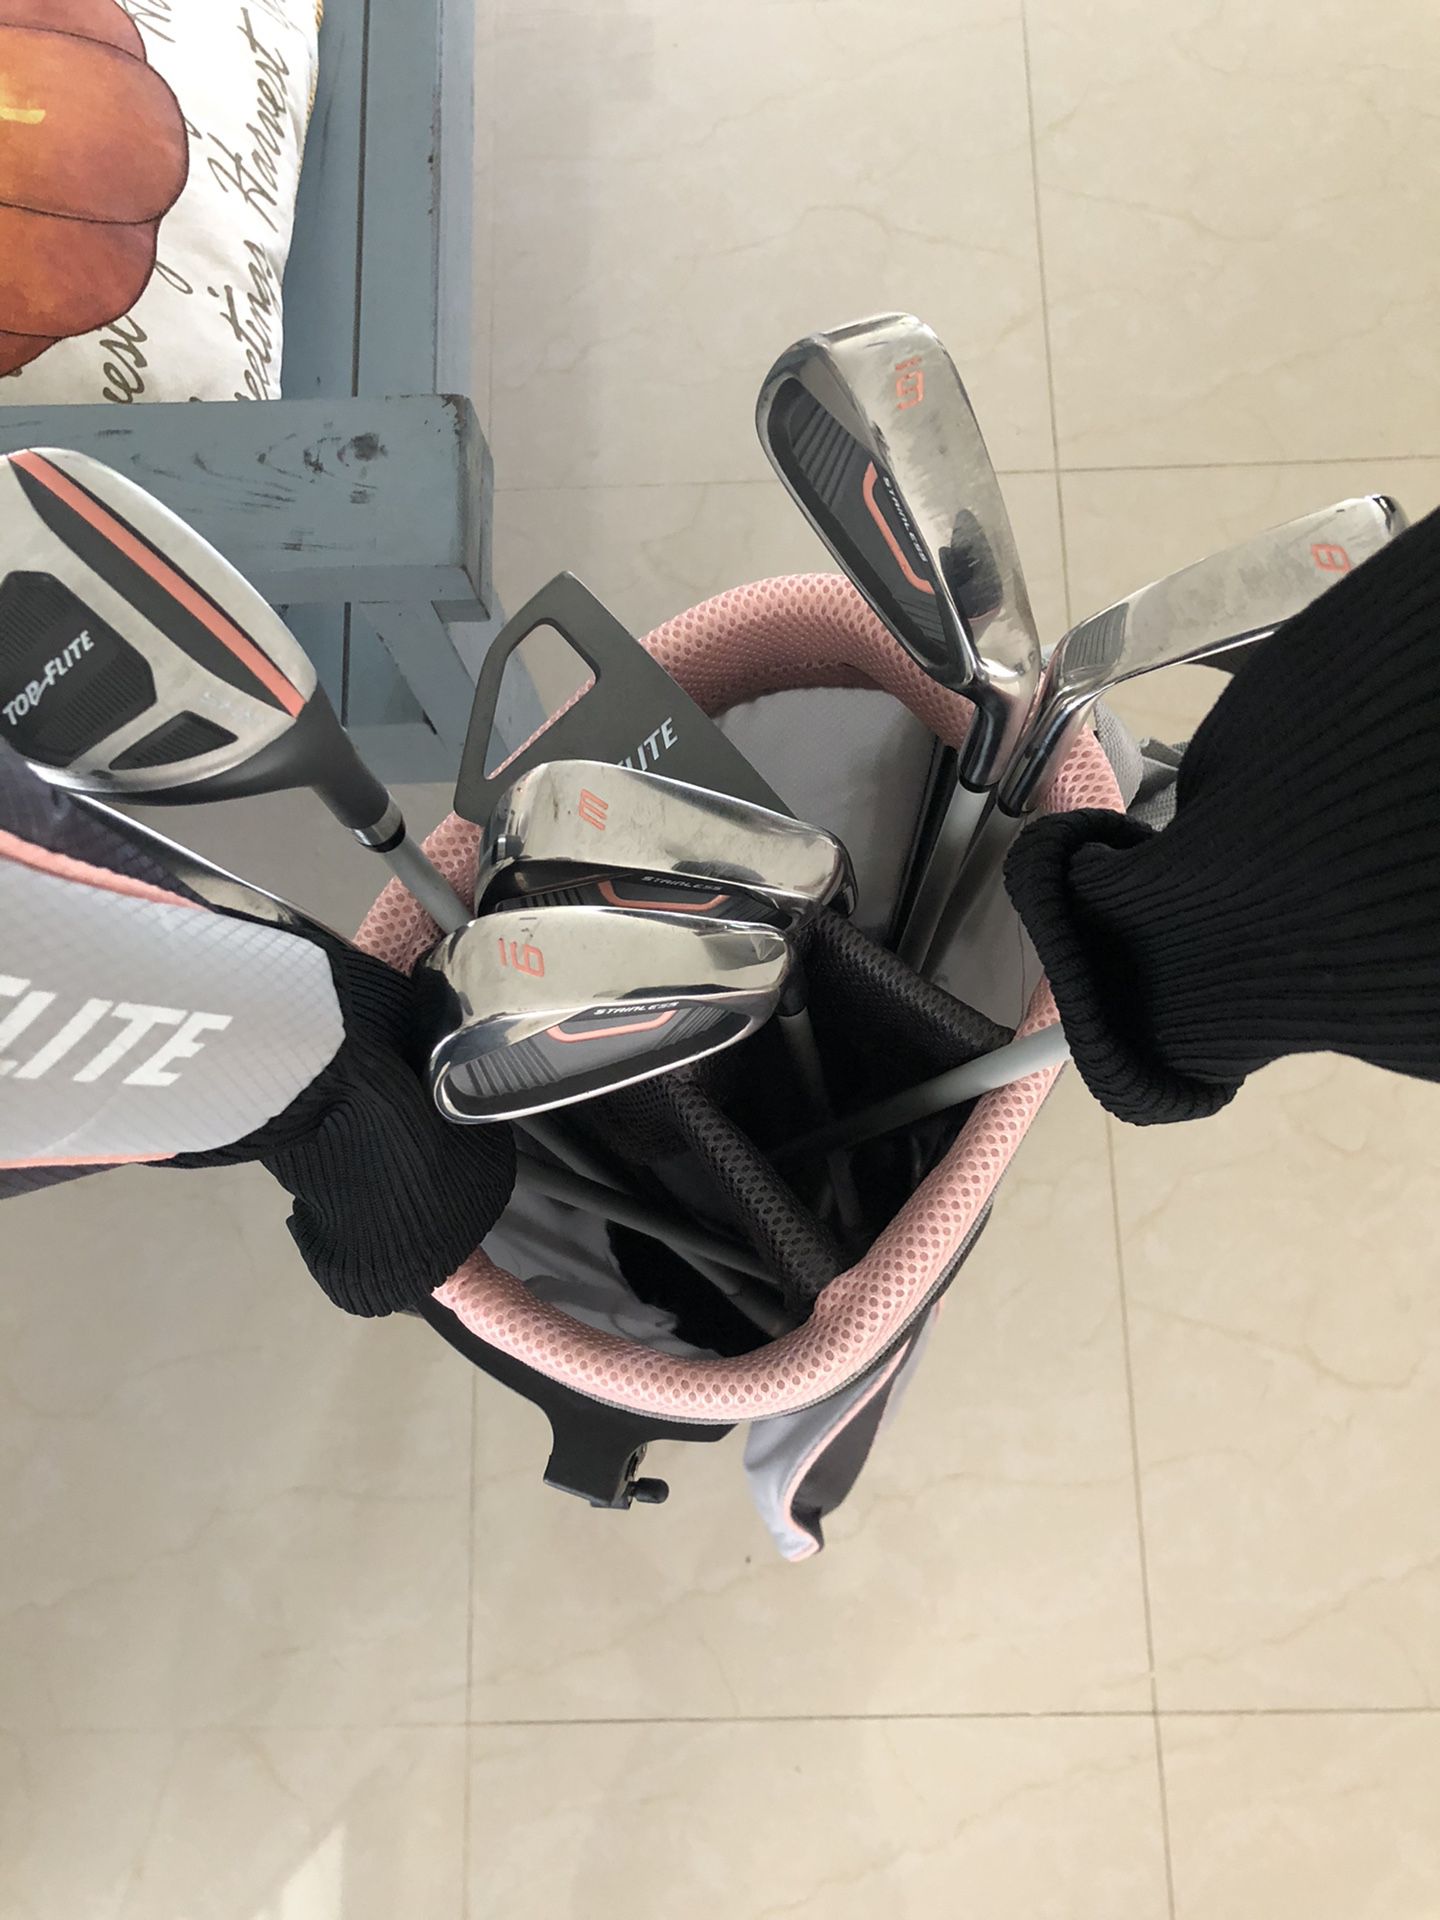 Women’s right handed golf clubs and bag